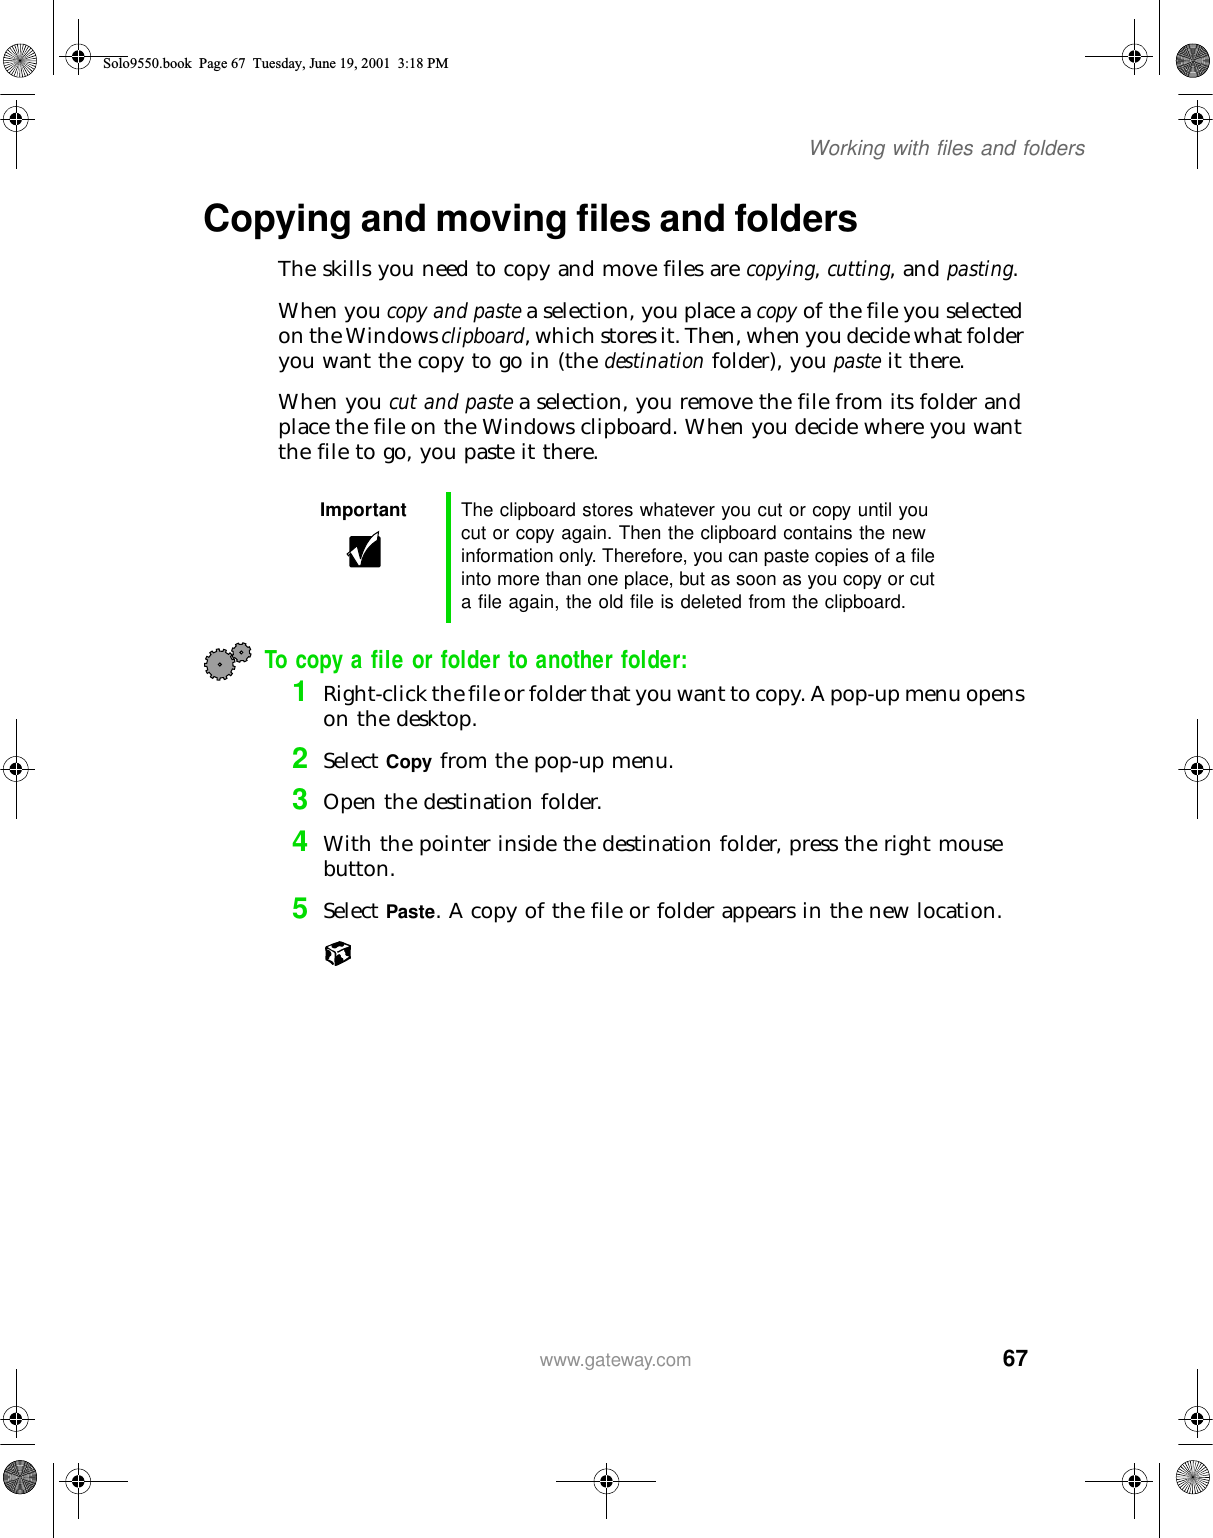 67Working with files and folderswww.gateway.comCopying and moving files and foldersThe skills you need to copy and move files are copying, cutting, and pasting.When you copy and paste a selection, you place a copy of the file you selected on the Windows clipboard, which stores it. Then, when you decide what folder you want the copy to go in (the destination folder), you paste it there.When you cut and paste a selection, you remove the file from its folder and place the file on the Windows clipboard. When you decide where you want the file to go, you paste it there.To copy a file or folder to another folder:1Right-click the file or folder that you want to copy. A pop-up menu opens on the desktop.2Select Copy from the pop-up menu.3Open the destination folder.4With the pointer inside the destination folder, press the right mouse button.5Select Paste. A copy of the file or folder appears in the new location.Important The clipboard stores whatever you cut or copy until you cut or copy again. Then the clipboard contains the new information only. Therefore, you can paste copies of a file into more than one place, but as soon as you copy or cut a file again, the old file is deleted from the clipboard.Solo9550.book Page 67 Tuesday, June 19, 2001 3:18 PM